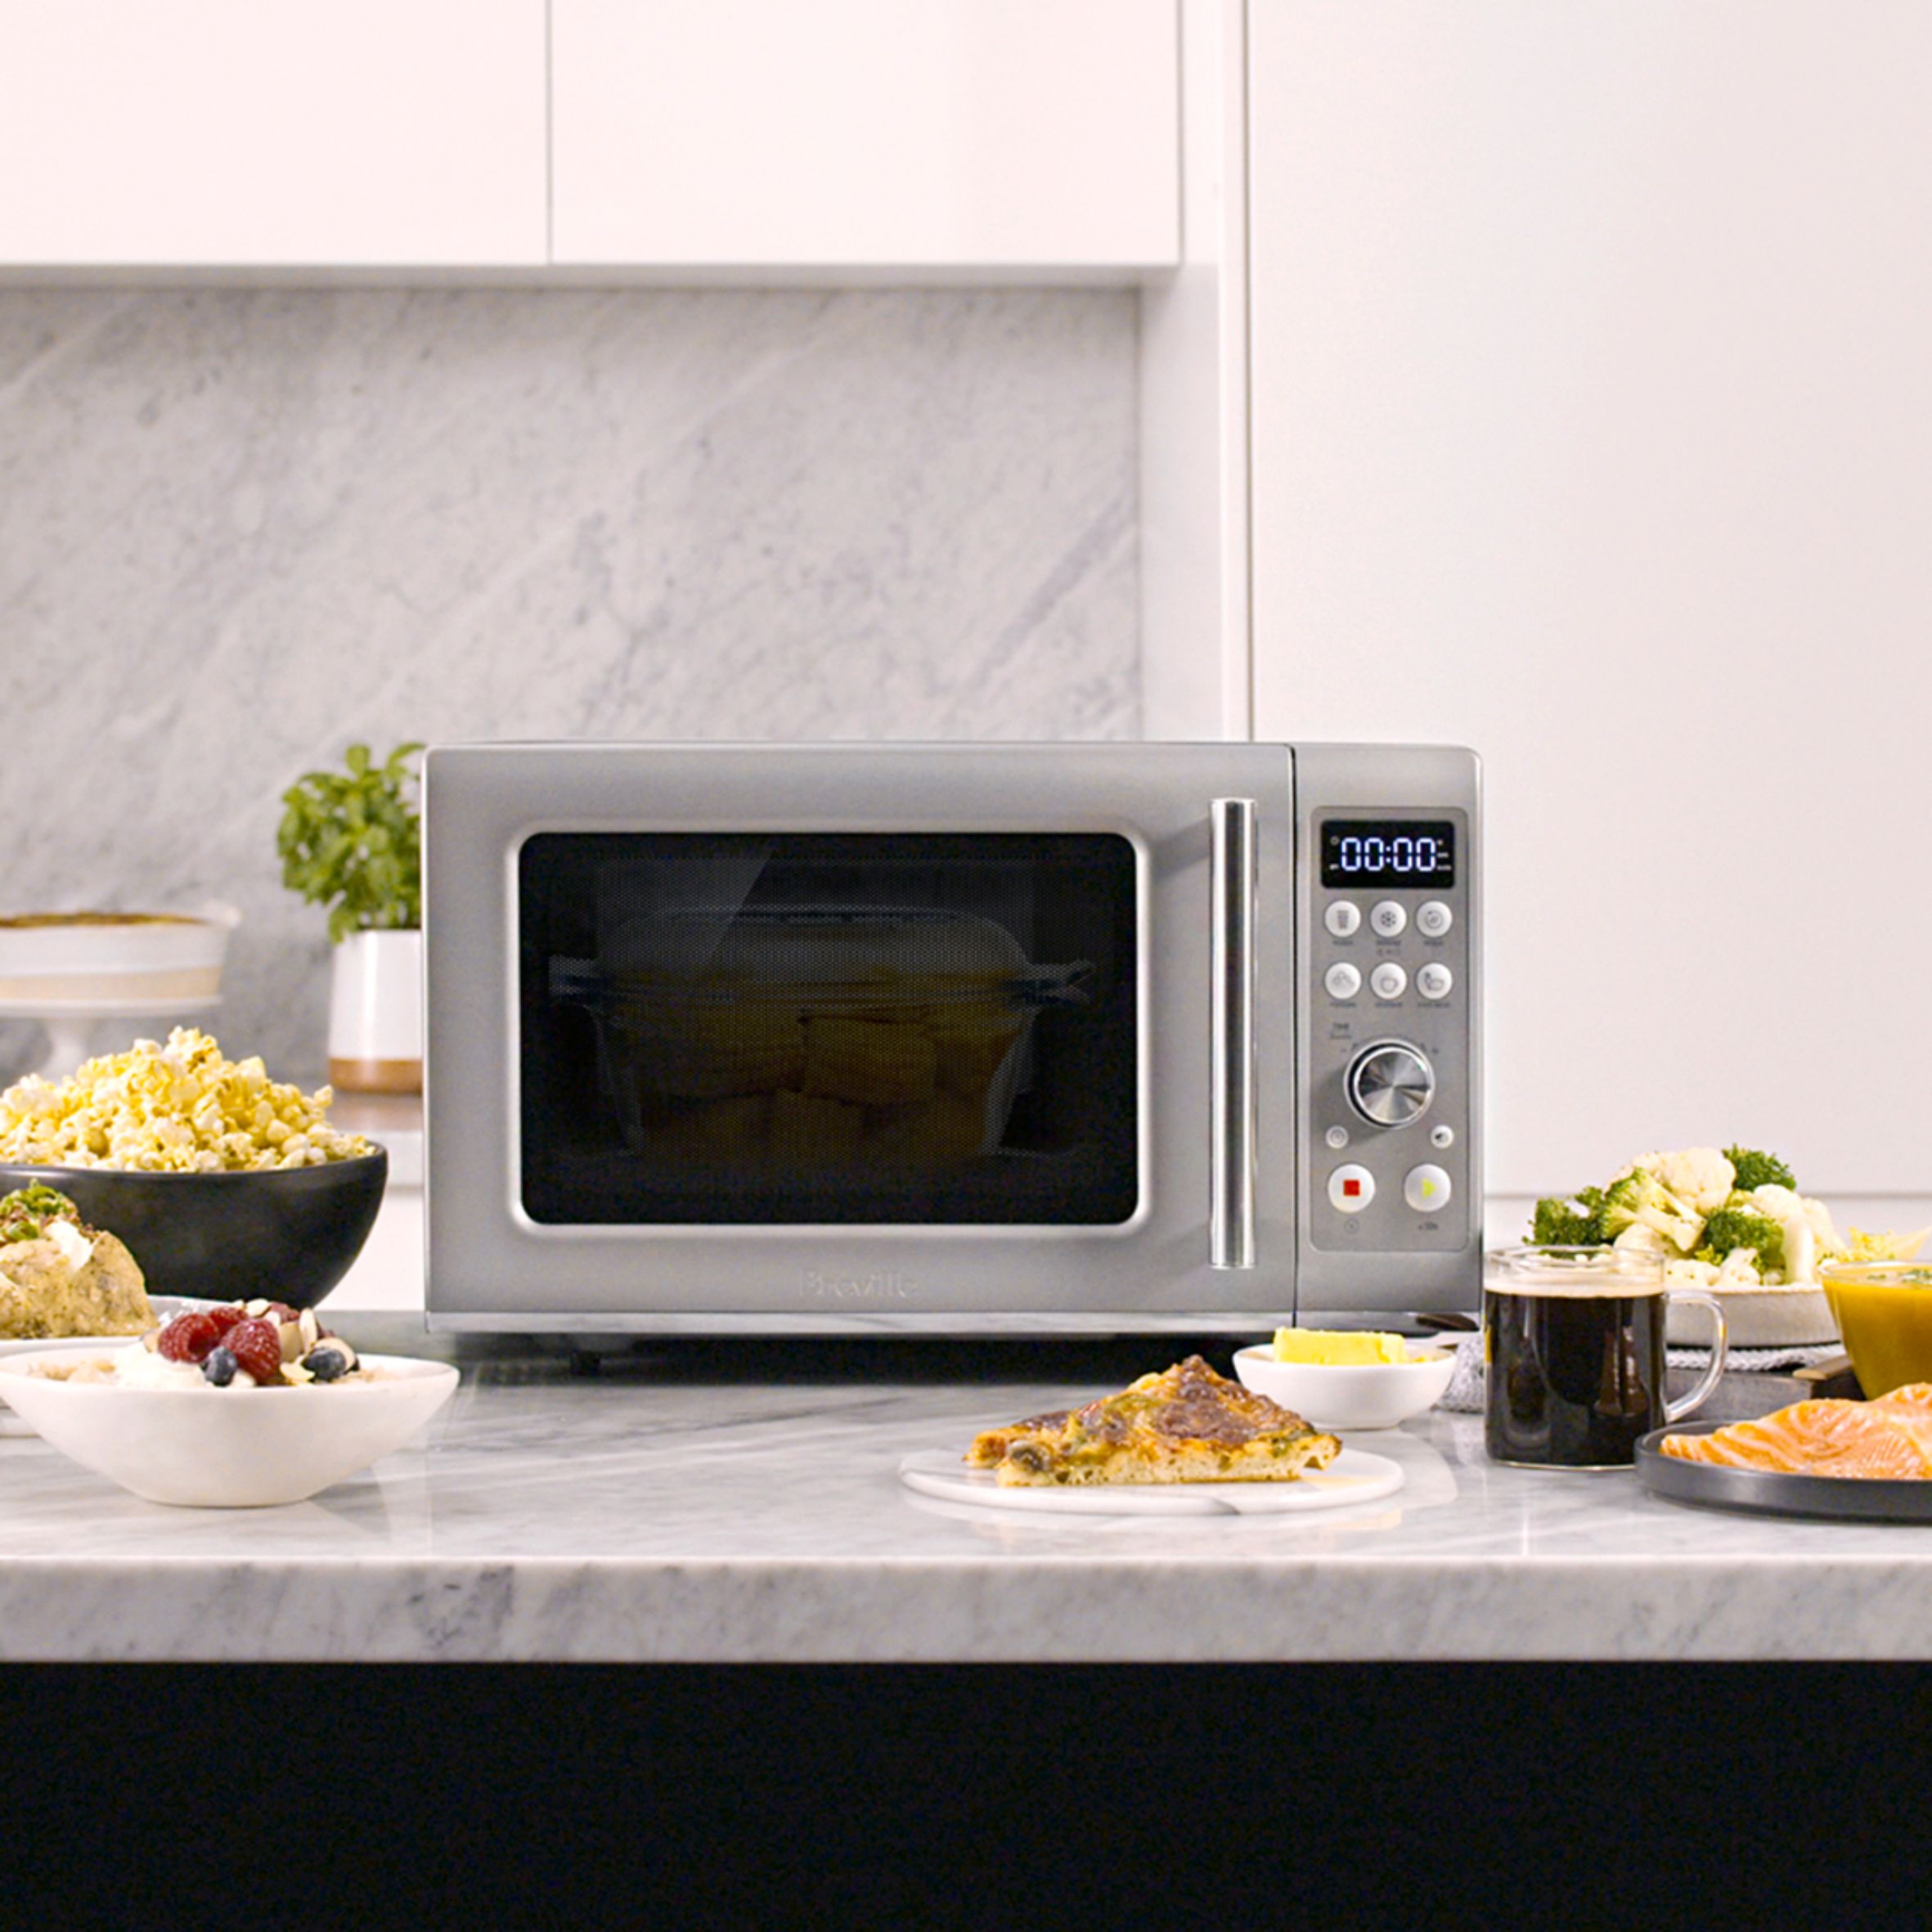 Breville, Compact Wave Microwave